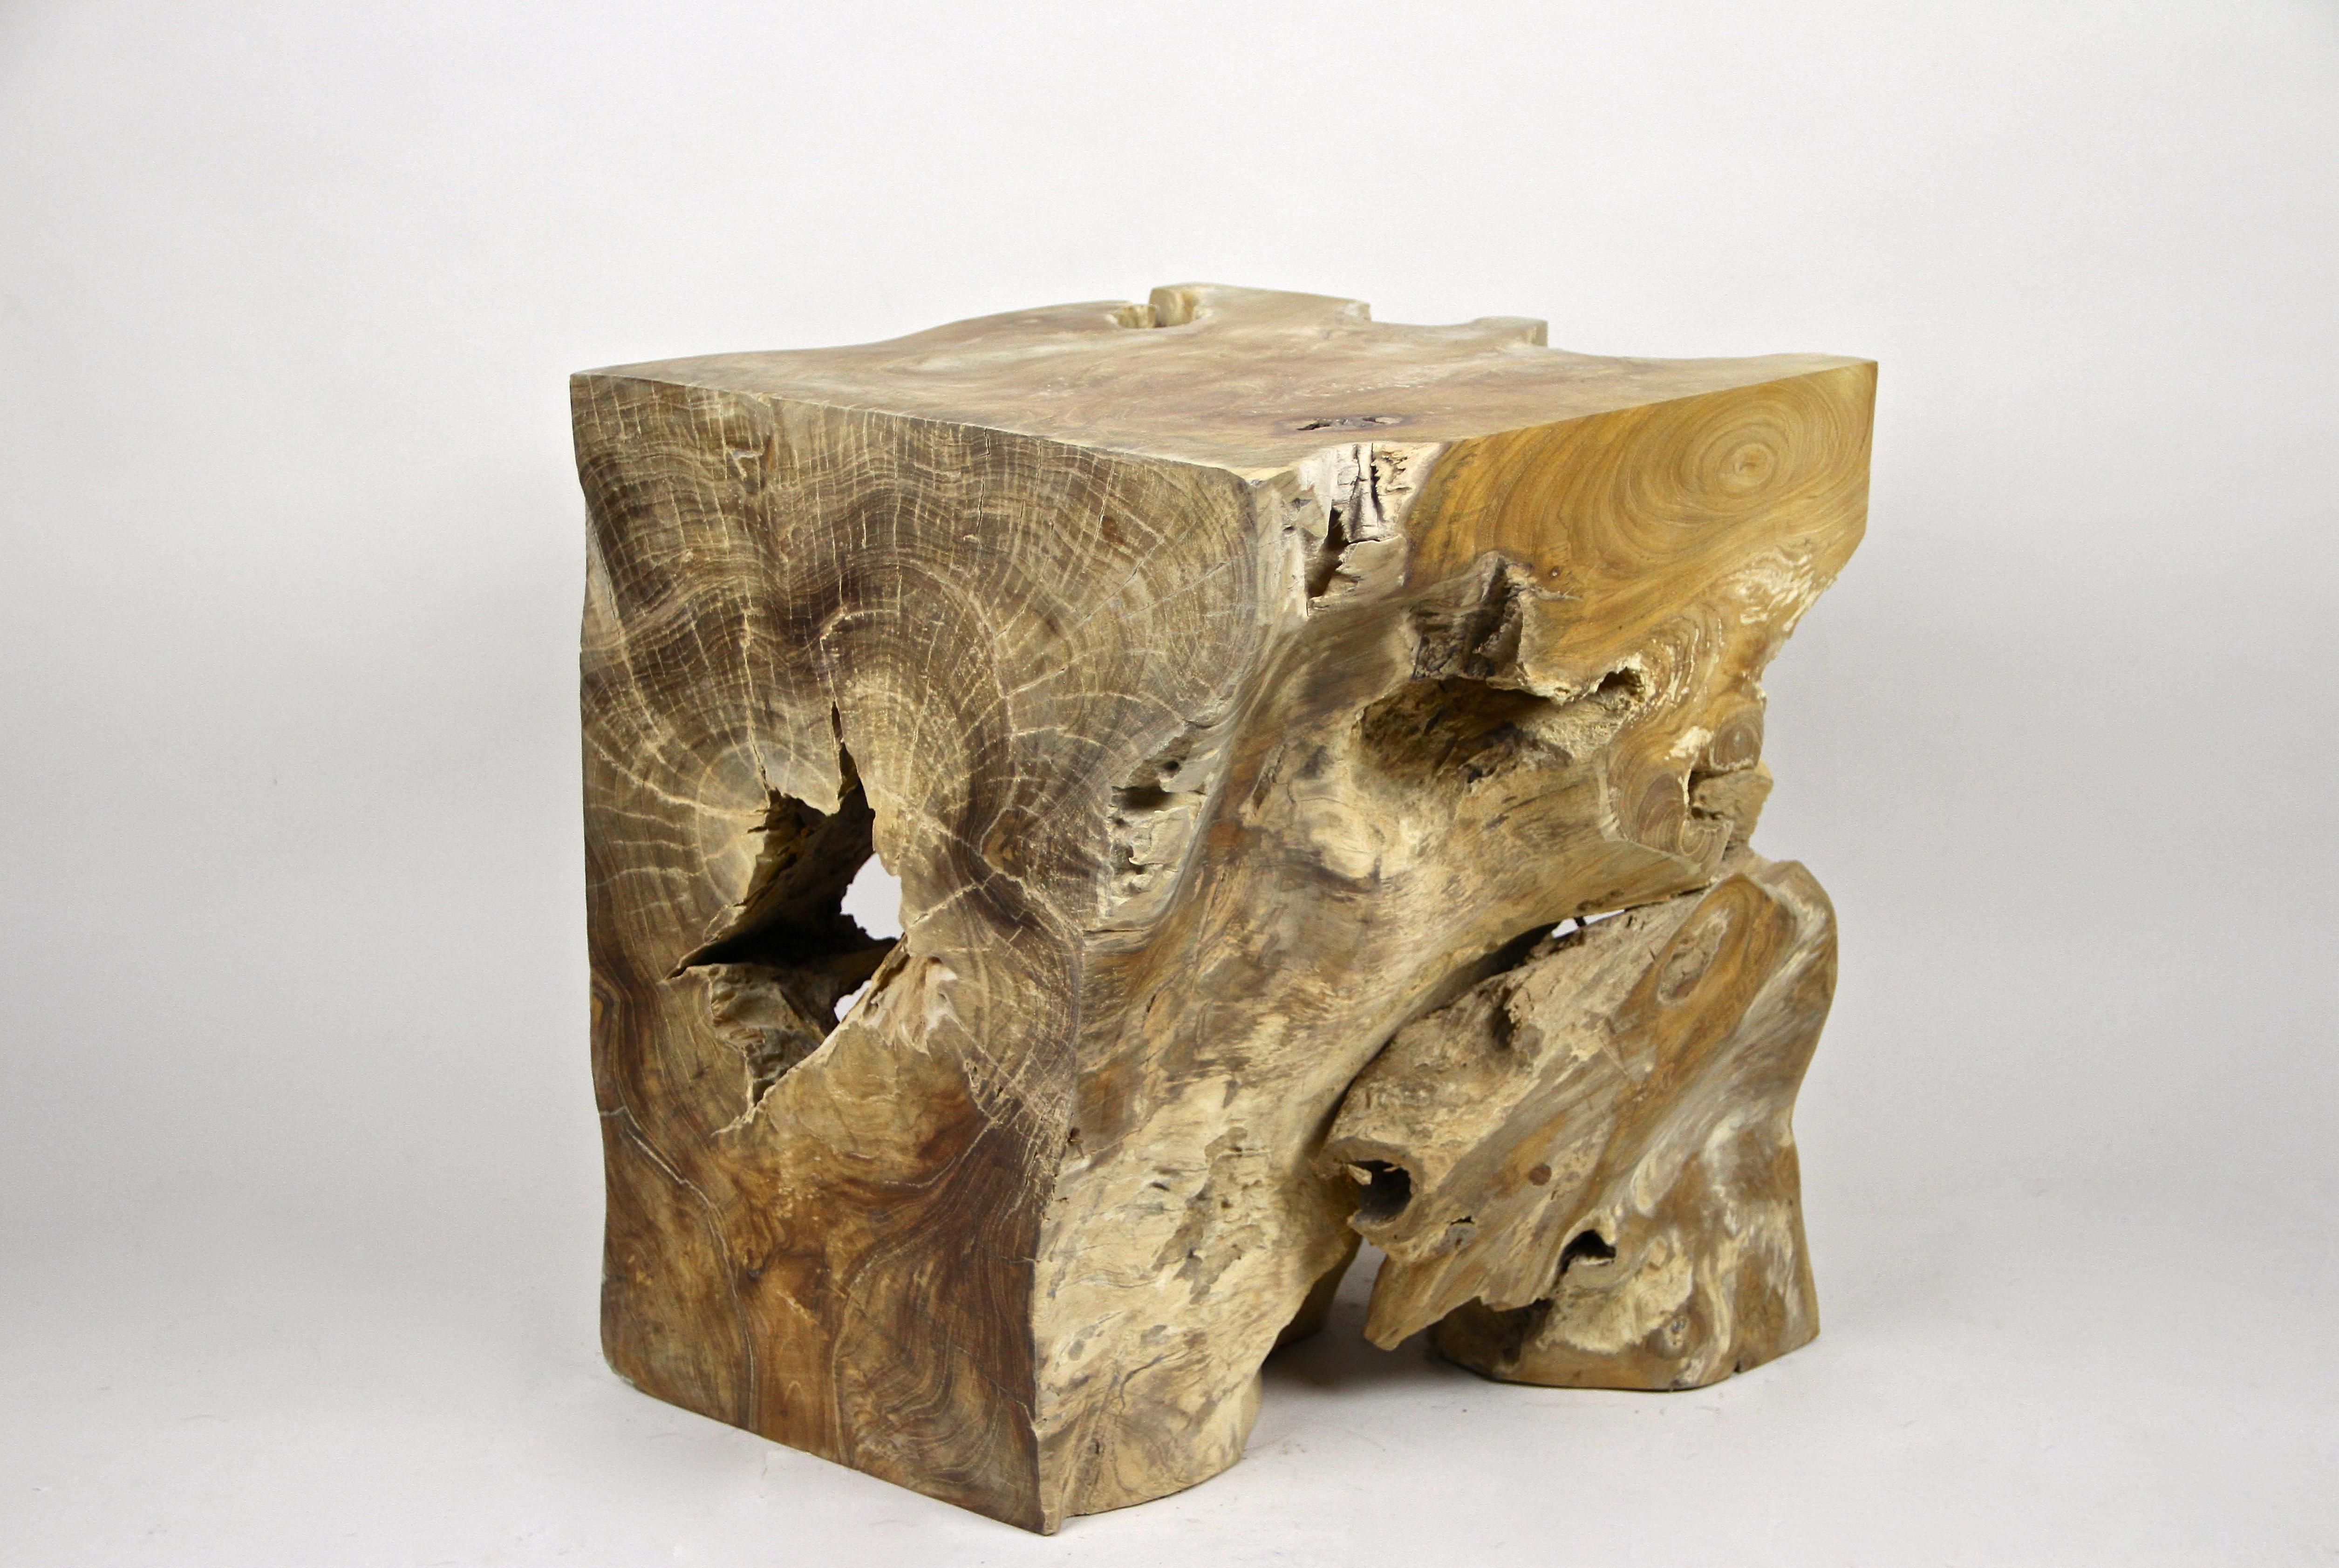 Contemporary Teak Root Side Table or Stool Oiled, Organic Modern